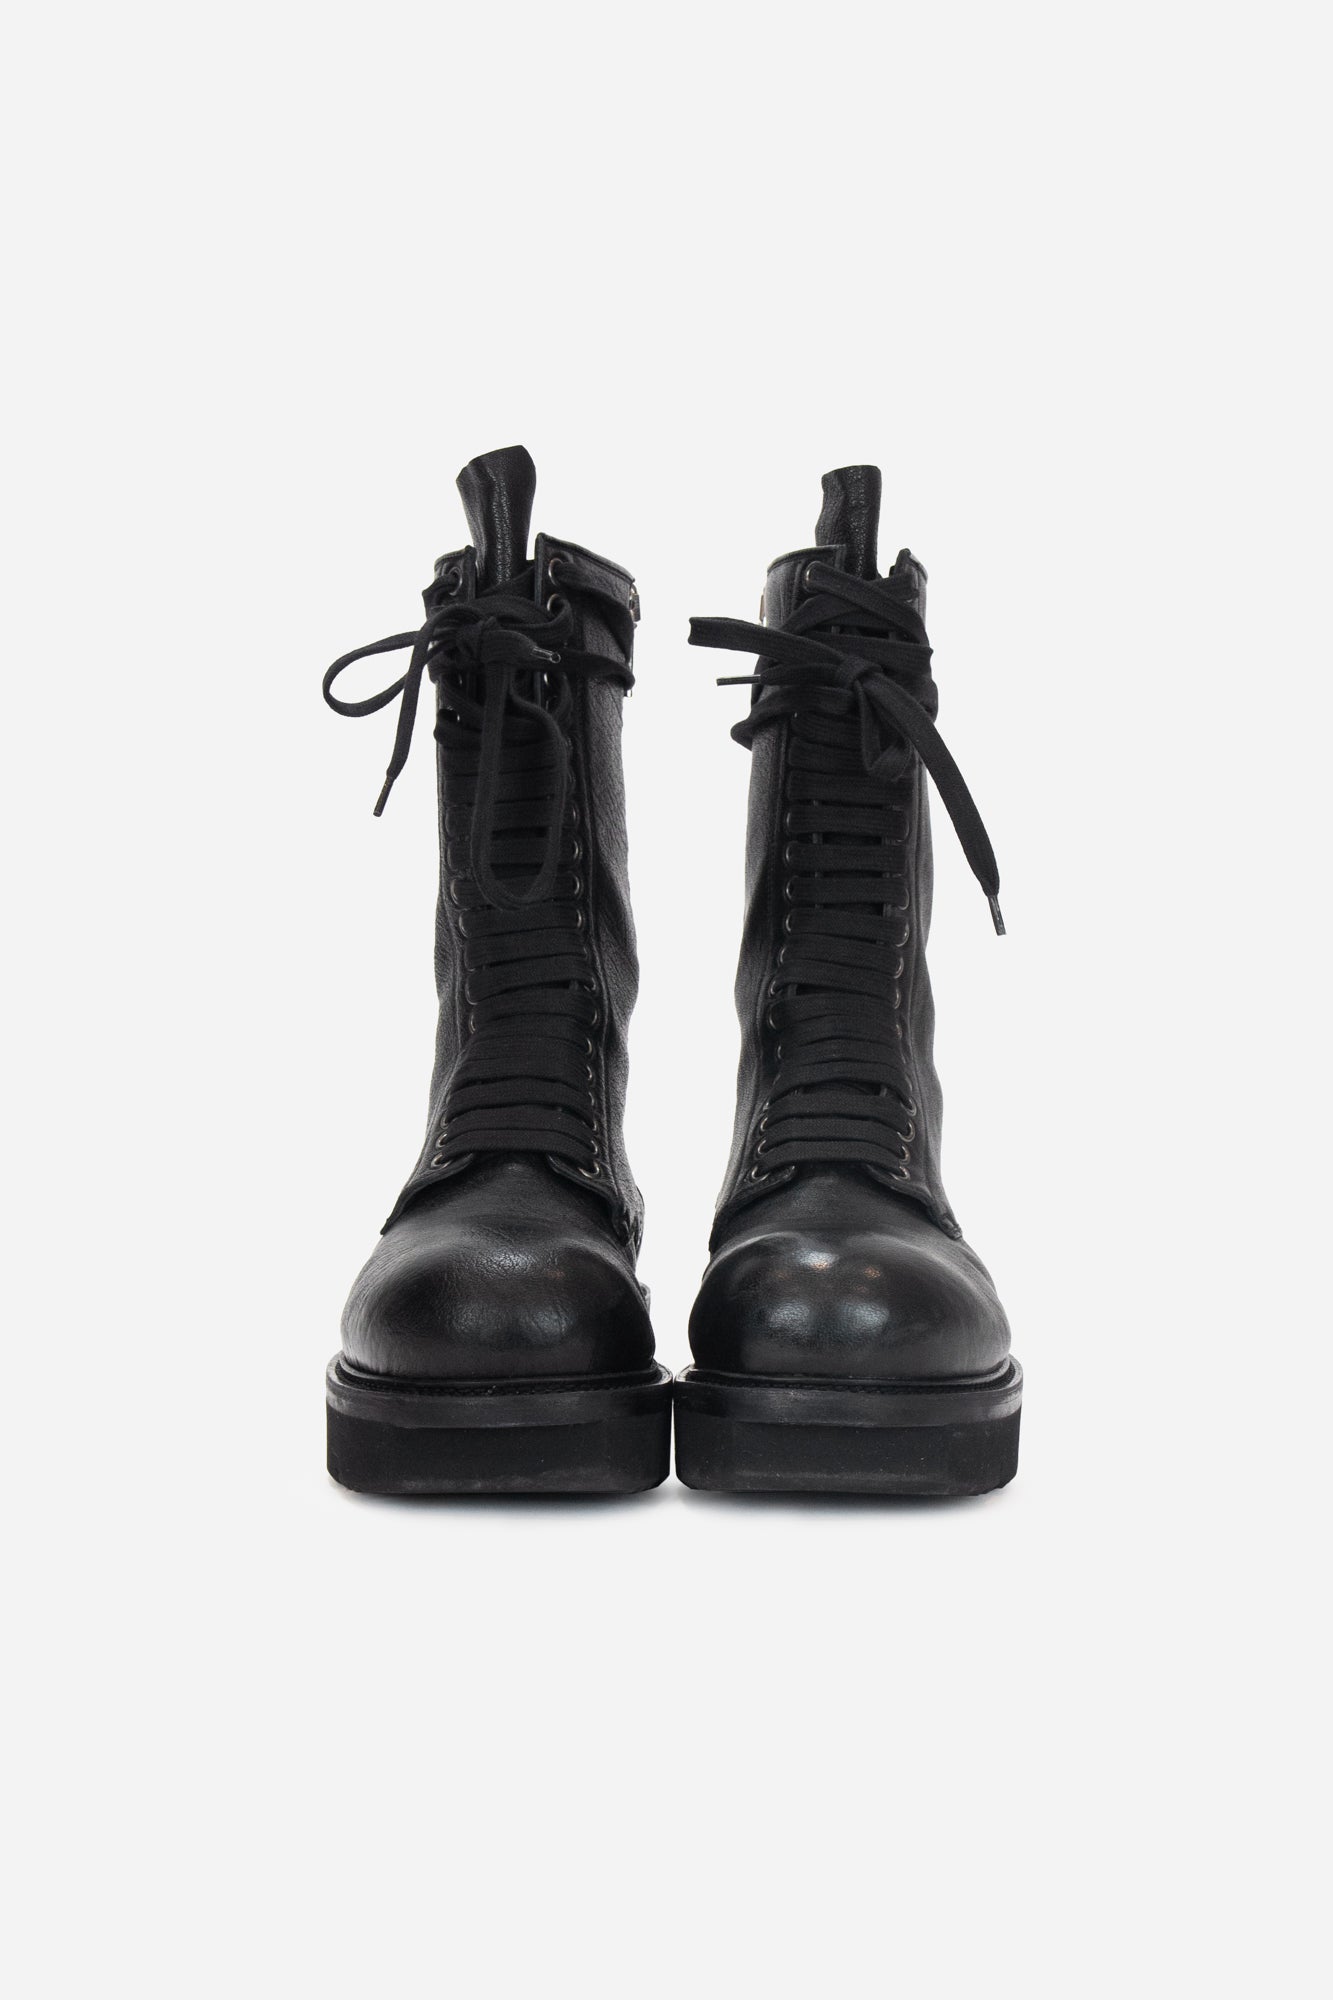 Black Technical Army Boots